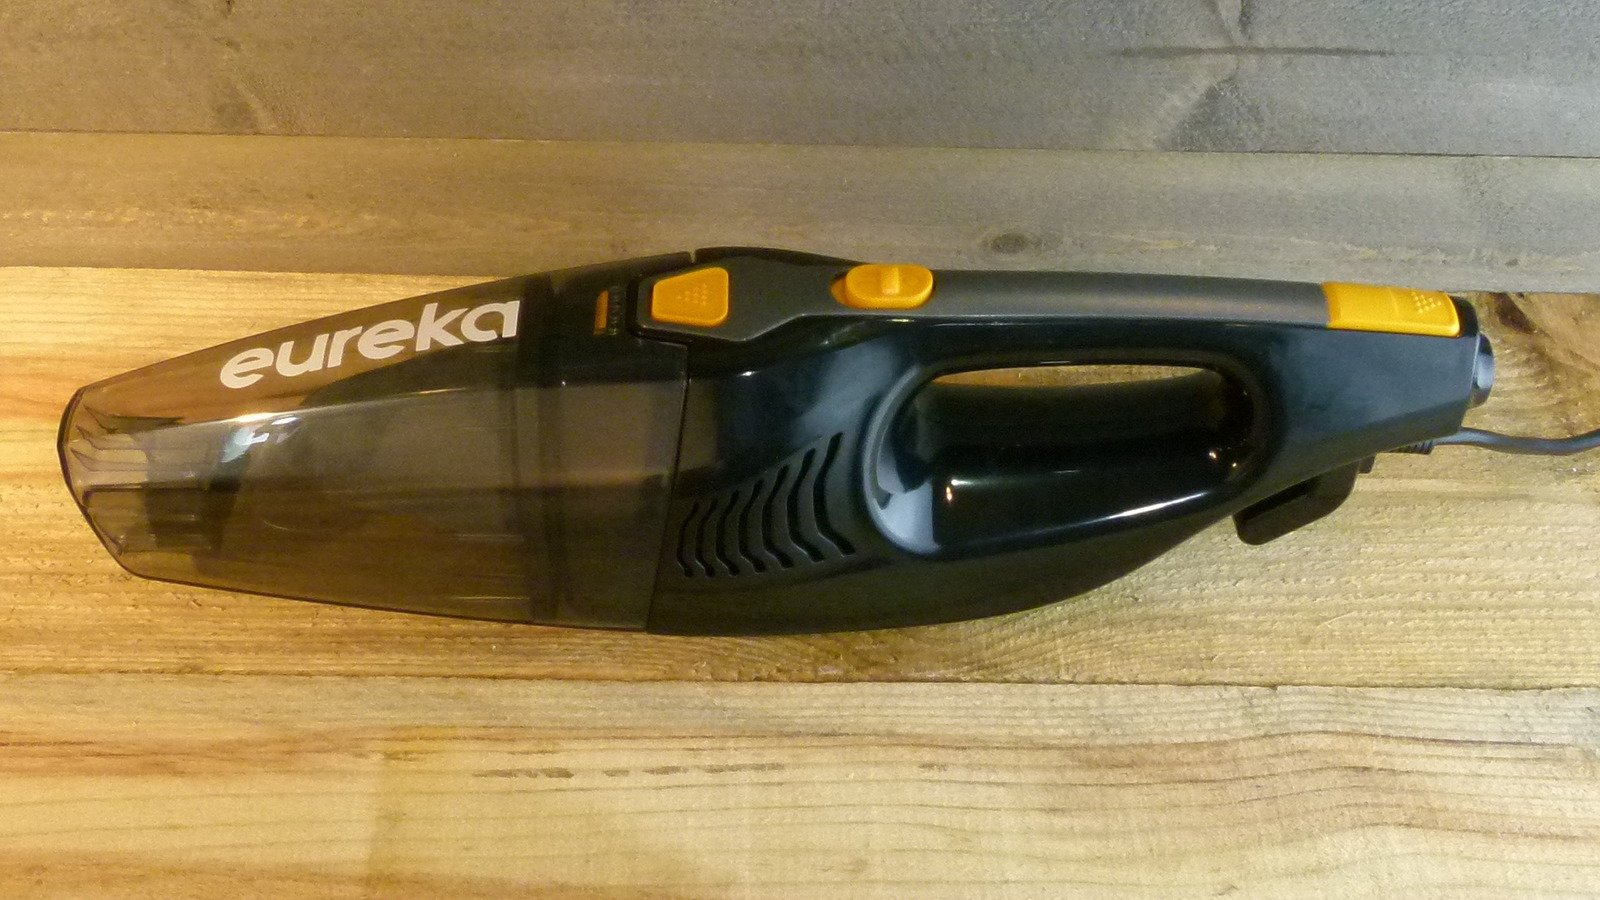 We Tried The Cheapest Stick Vacuum At Wayfair. Here's How It Went